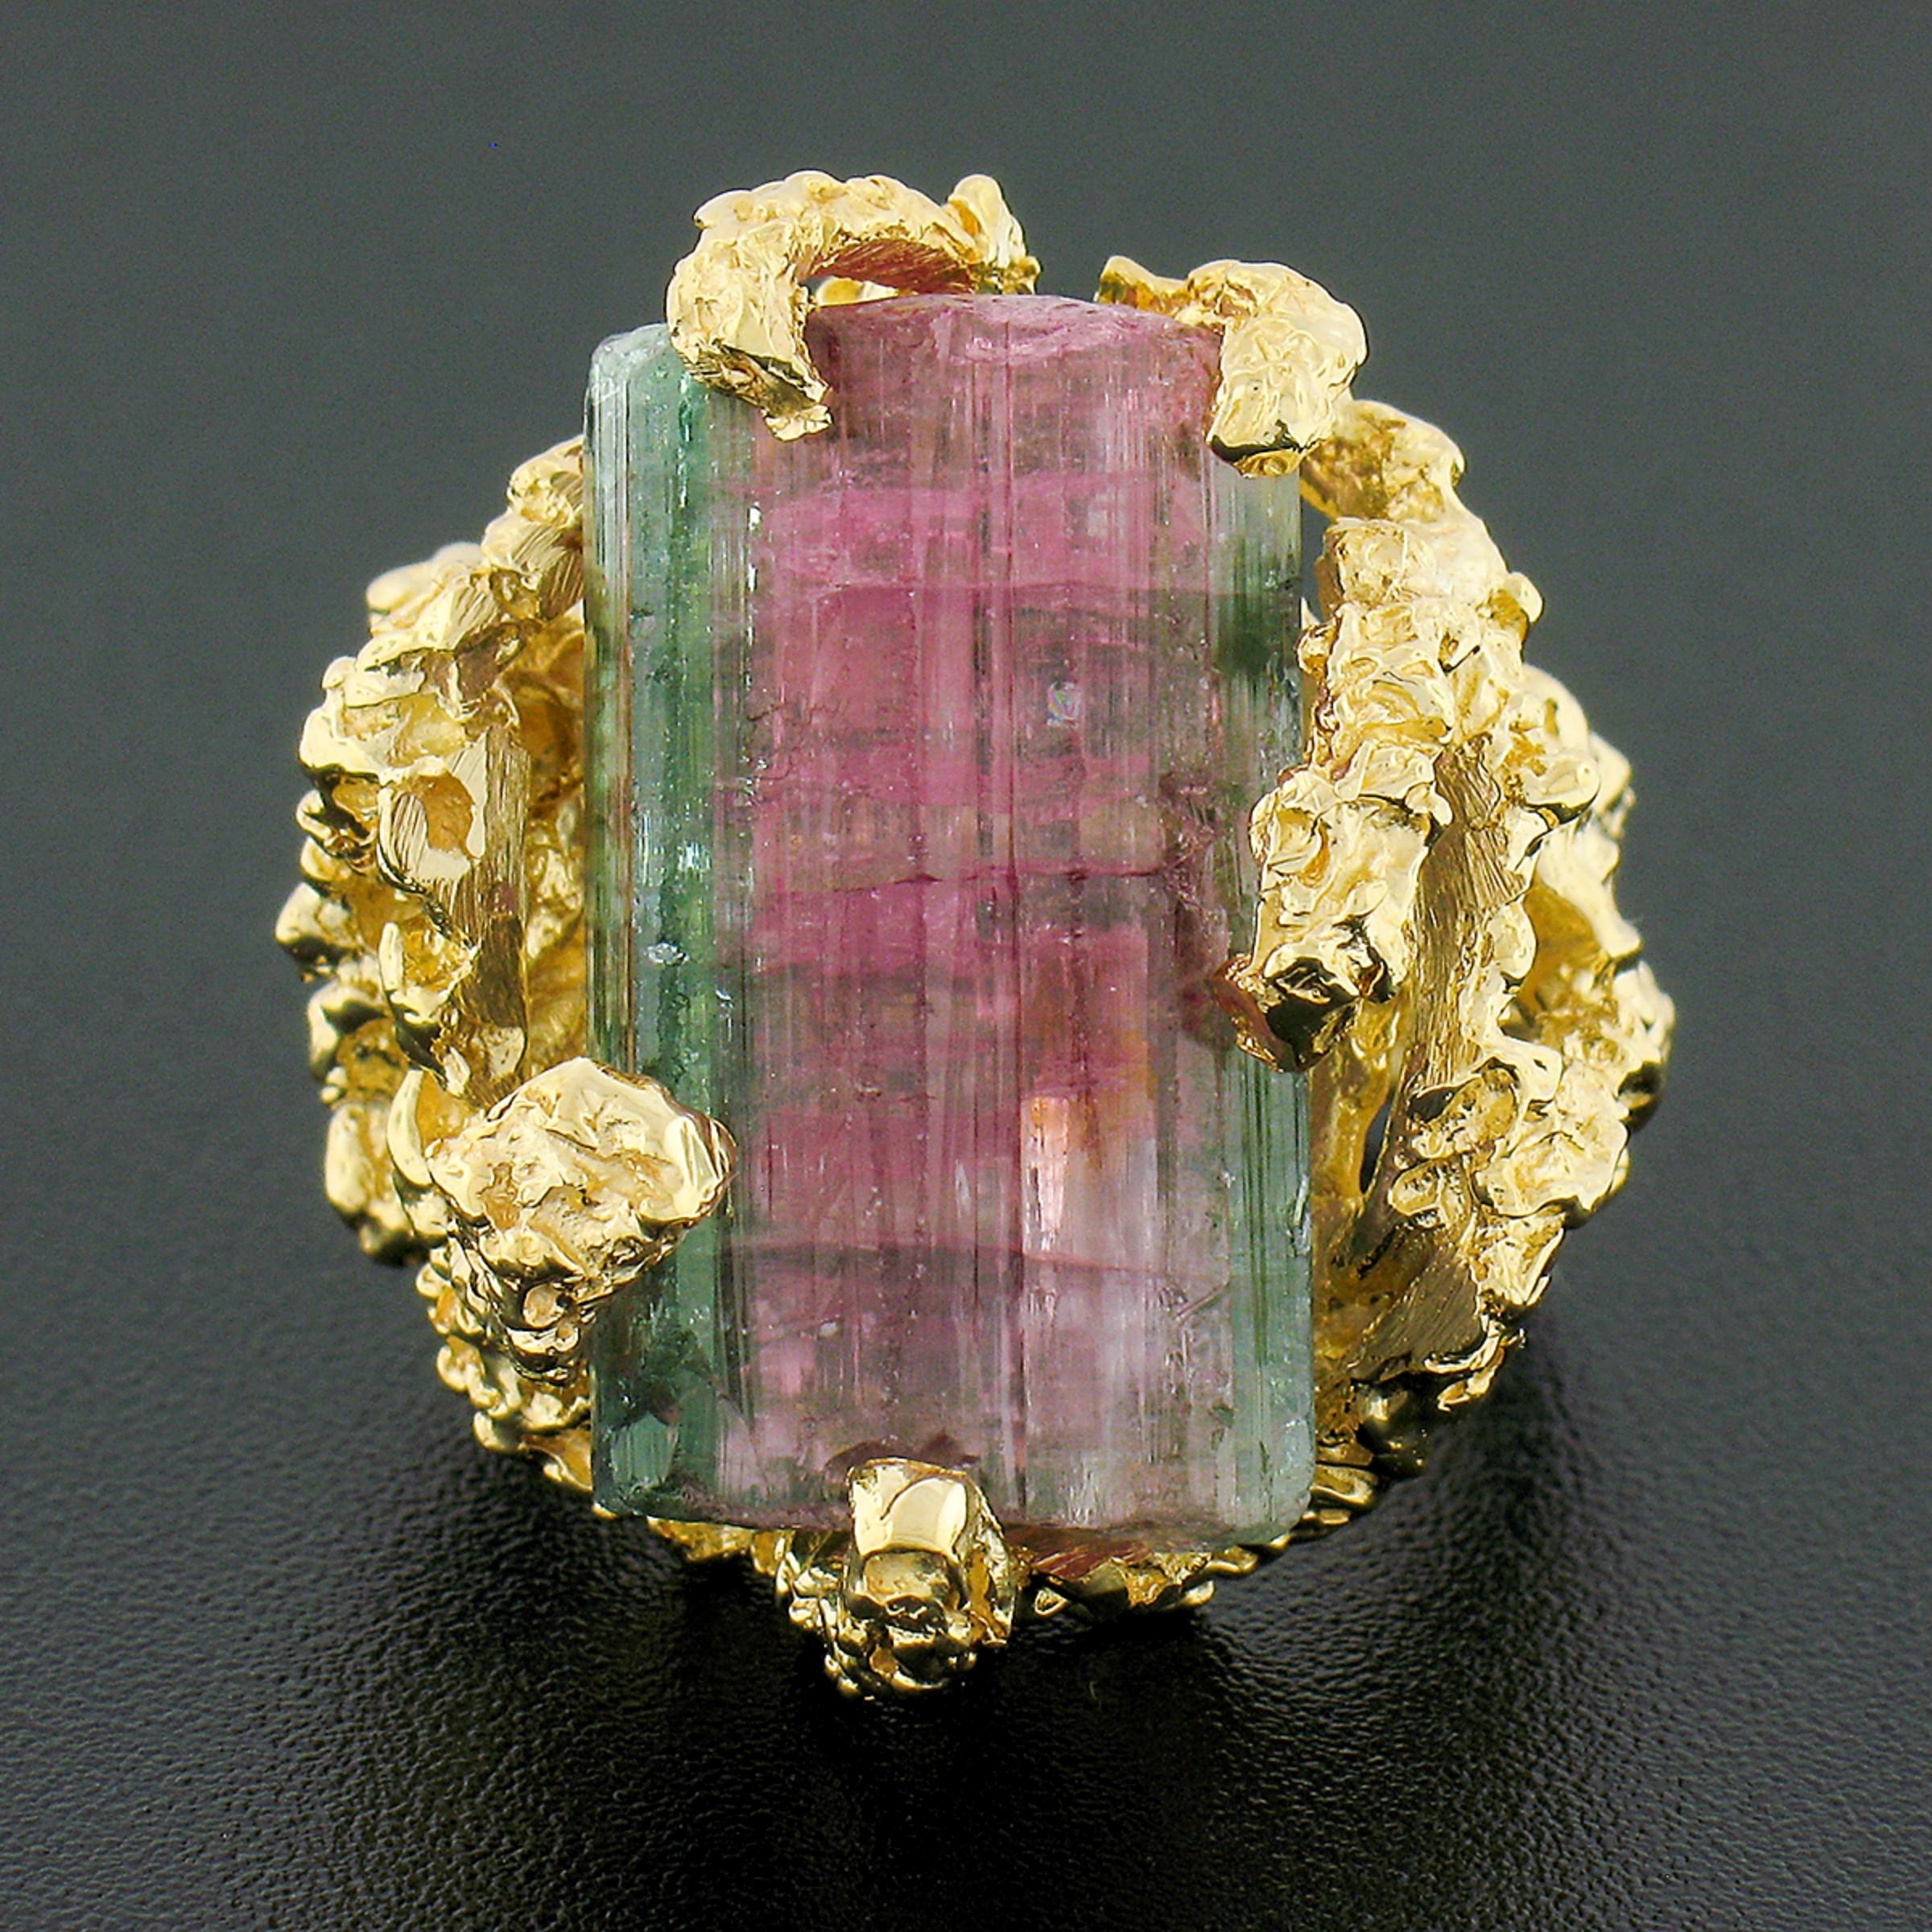 This unique vintage statement ring is crafted in solid 14k yellow gold and is set with a gorgeous, rough, uncut watermelon tourmaline stone at its center. The stone is a large size, weighing approximately 25 carats, with gorgeous green and purplish